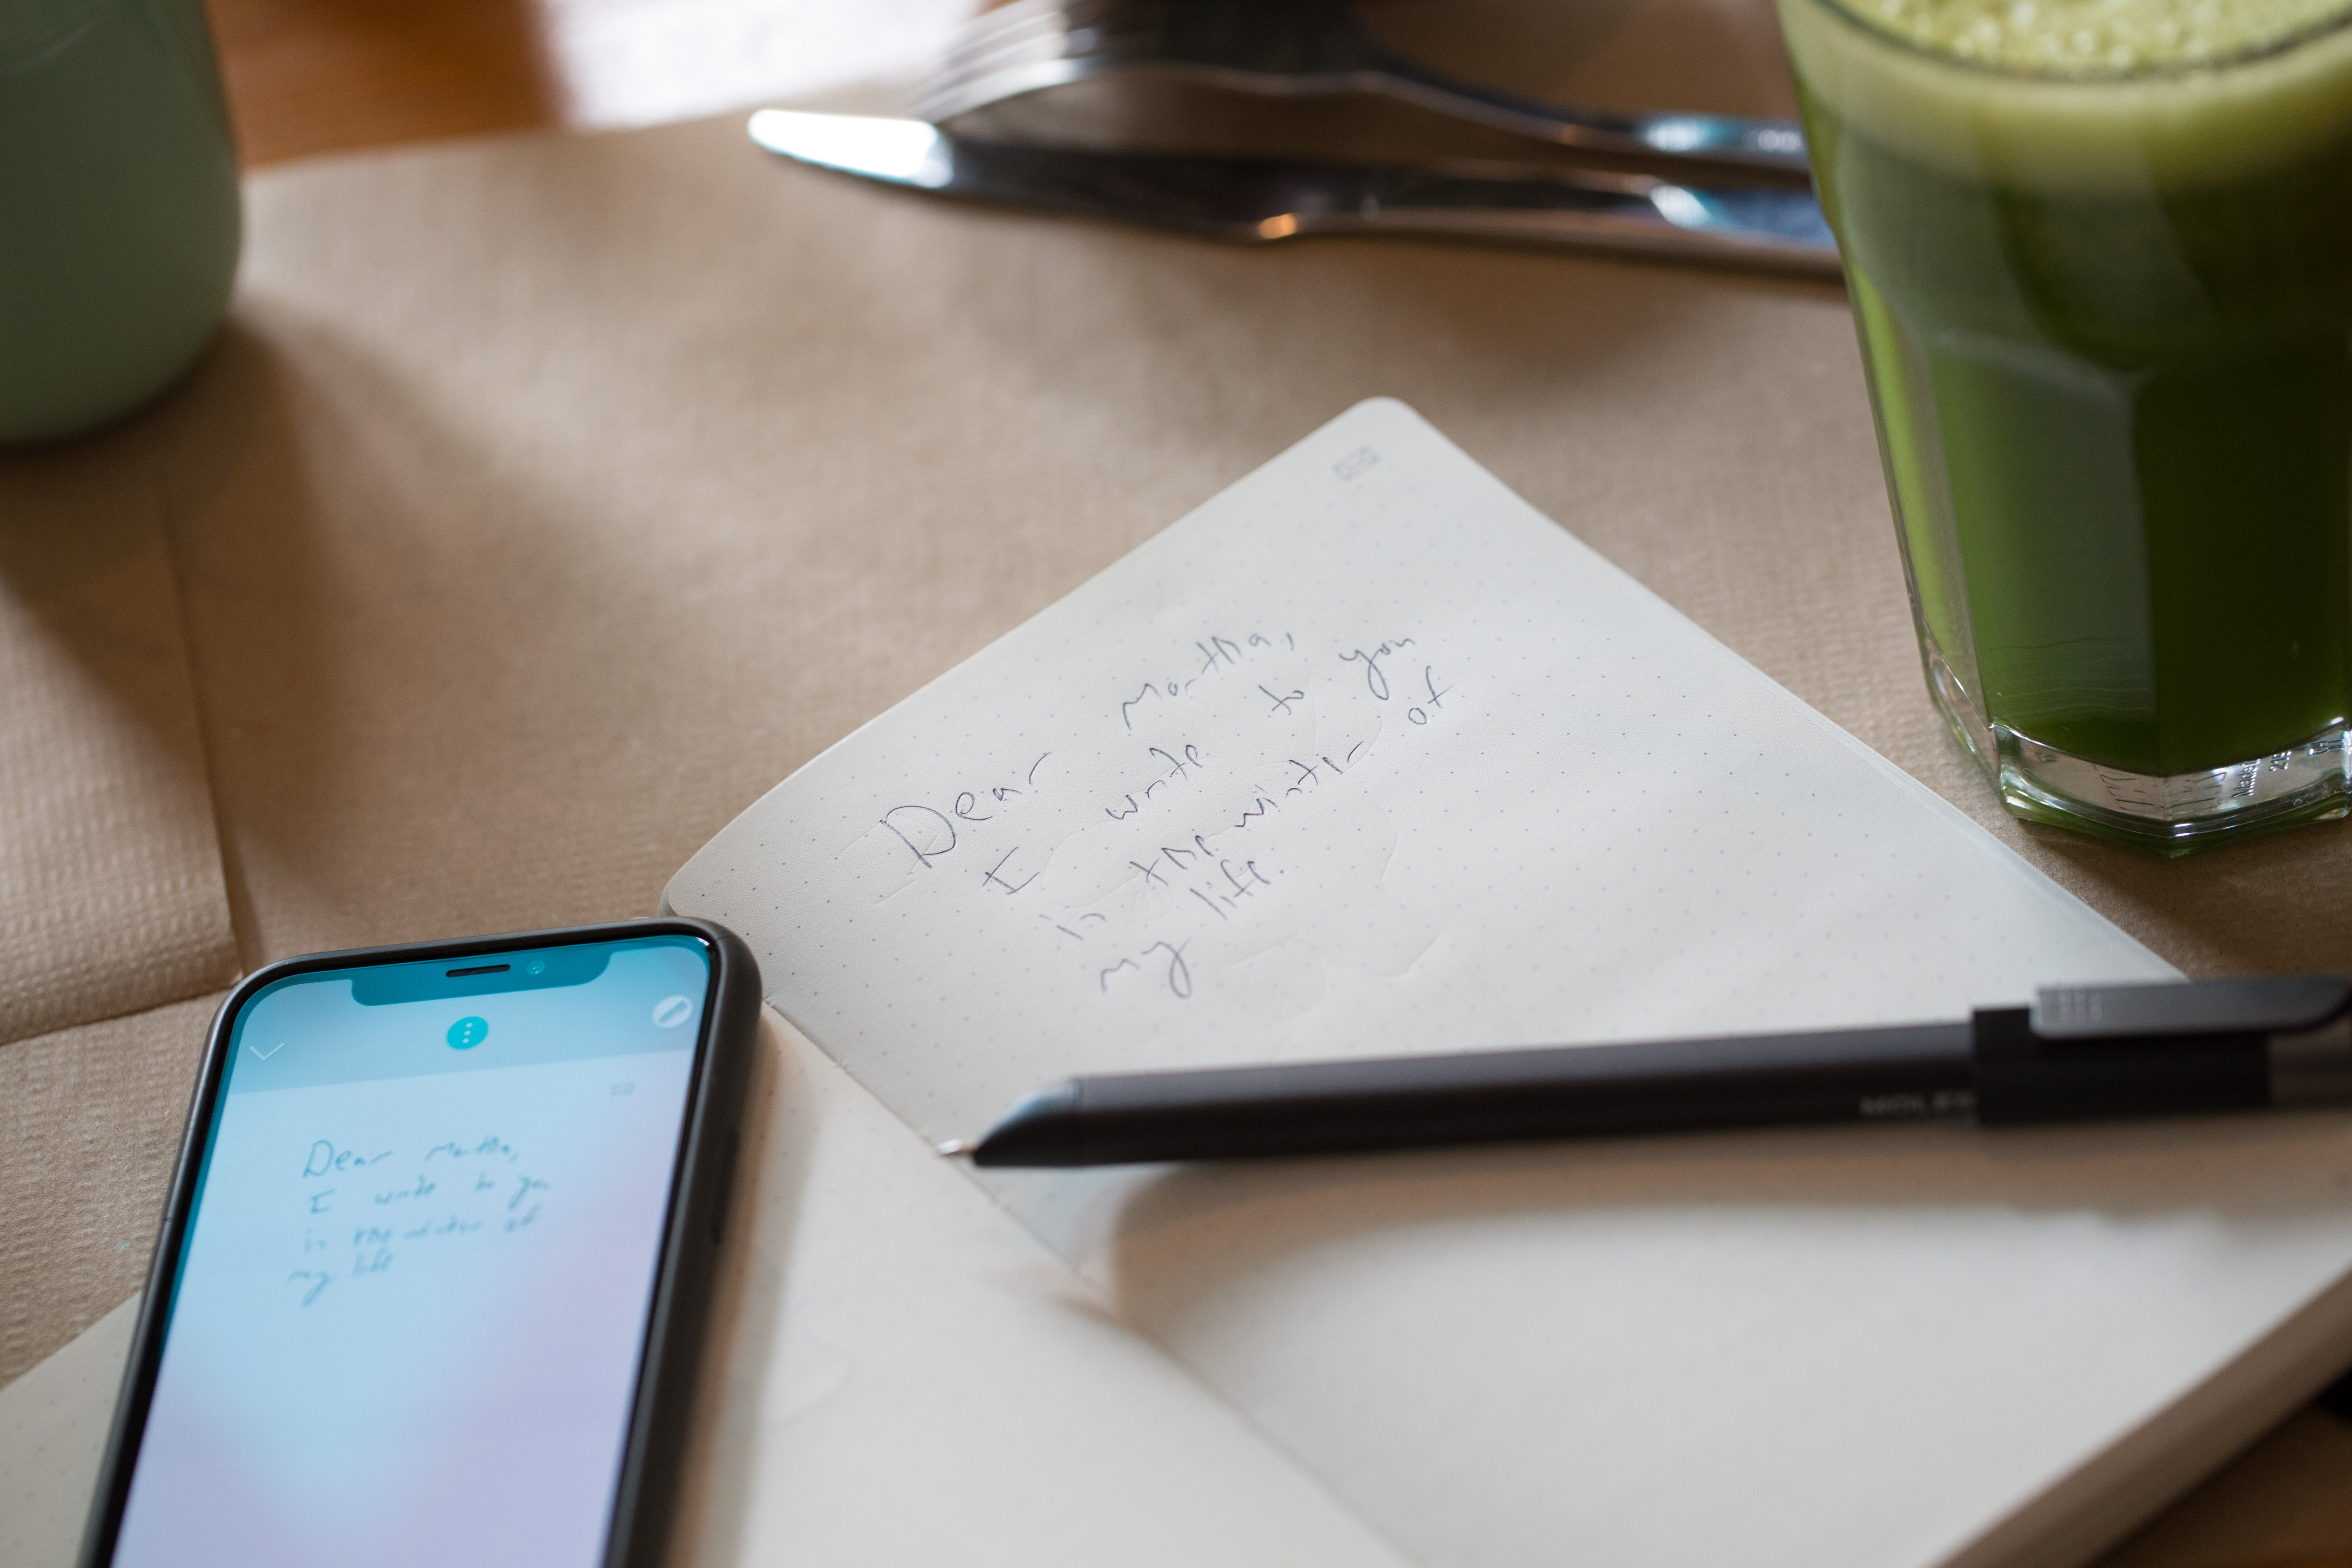 The Moleskine PEN+ ELLIPSE lets you record your scribblings right into your  pen